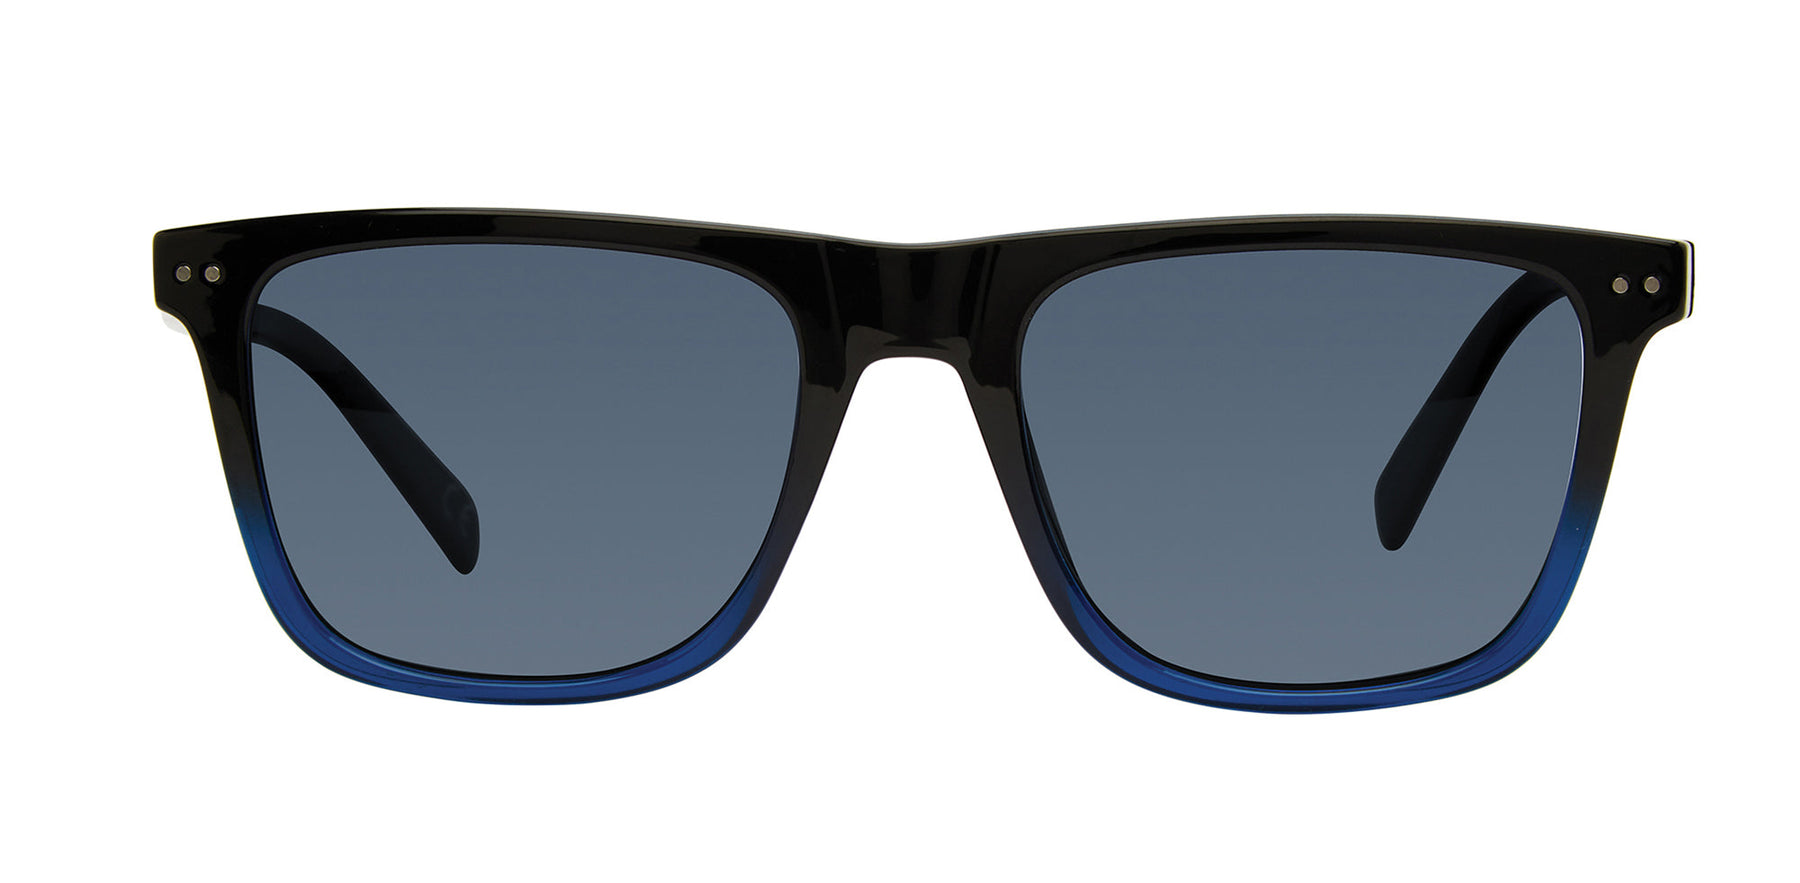 Prive Revaux The Lincoln/S Square Sunglasses | Fashion Eyewear US